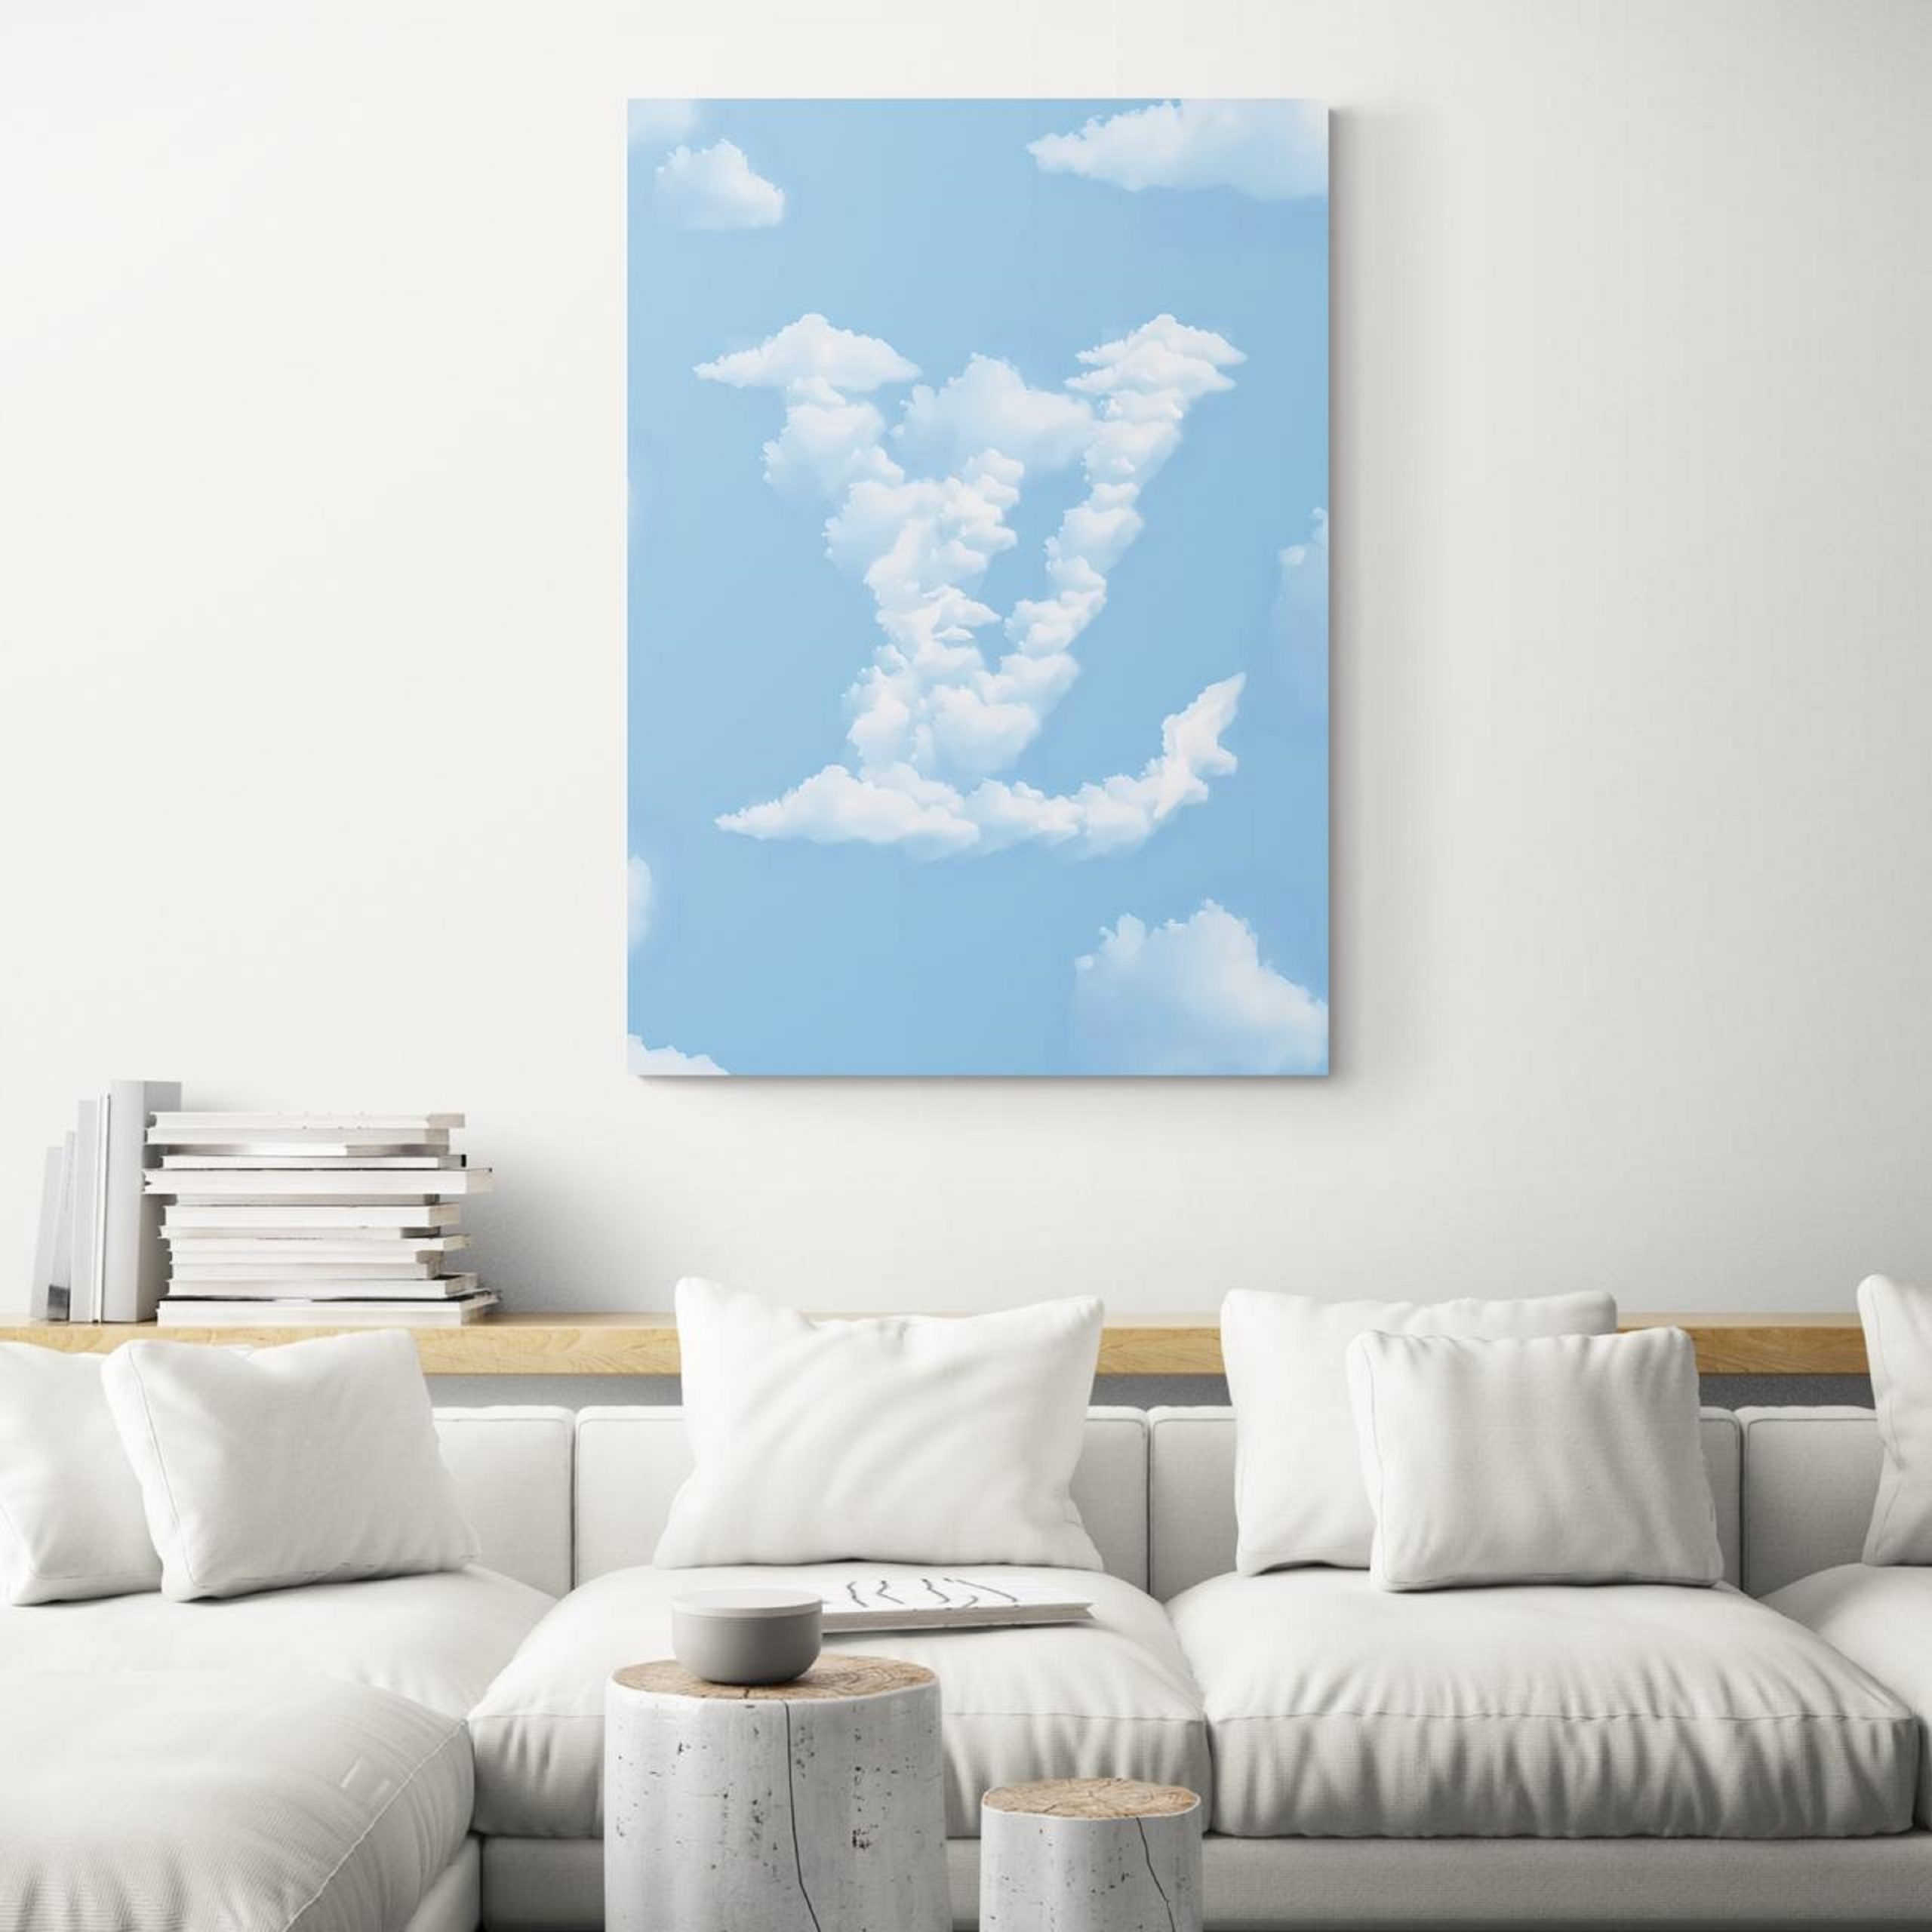 Buy Human Made Home Decor Online - Art Lux Decor